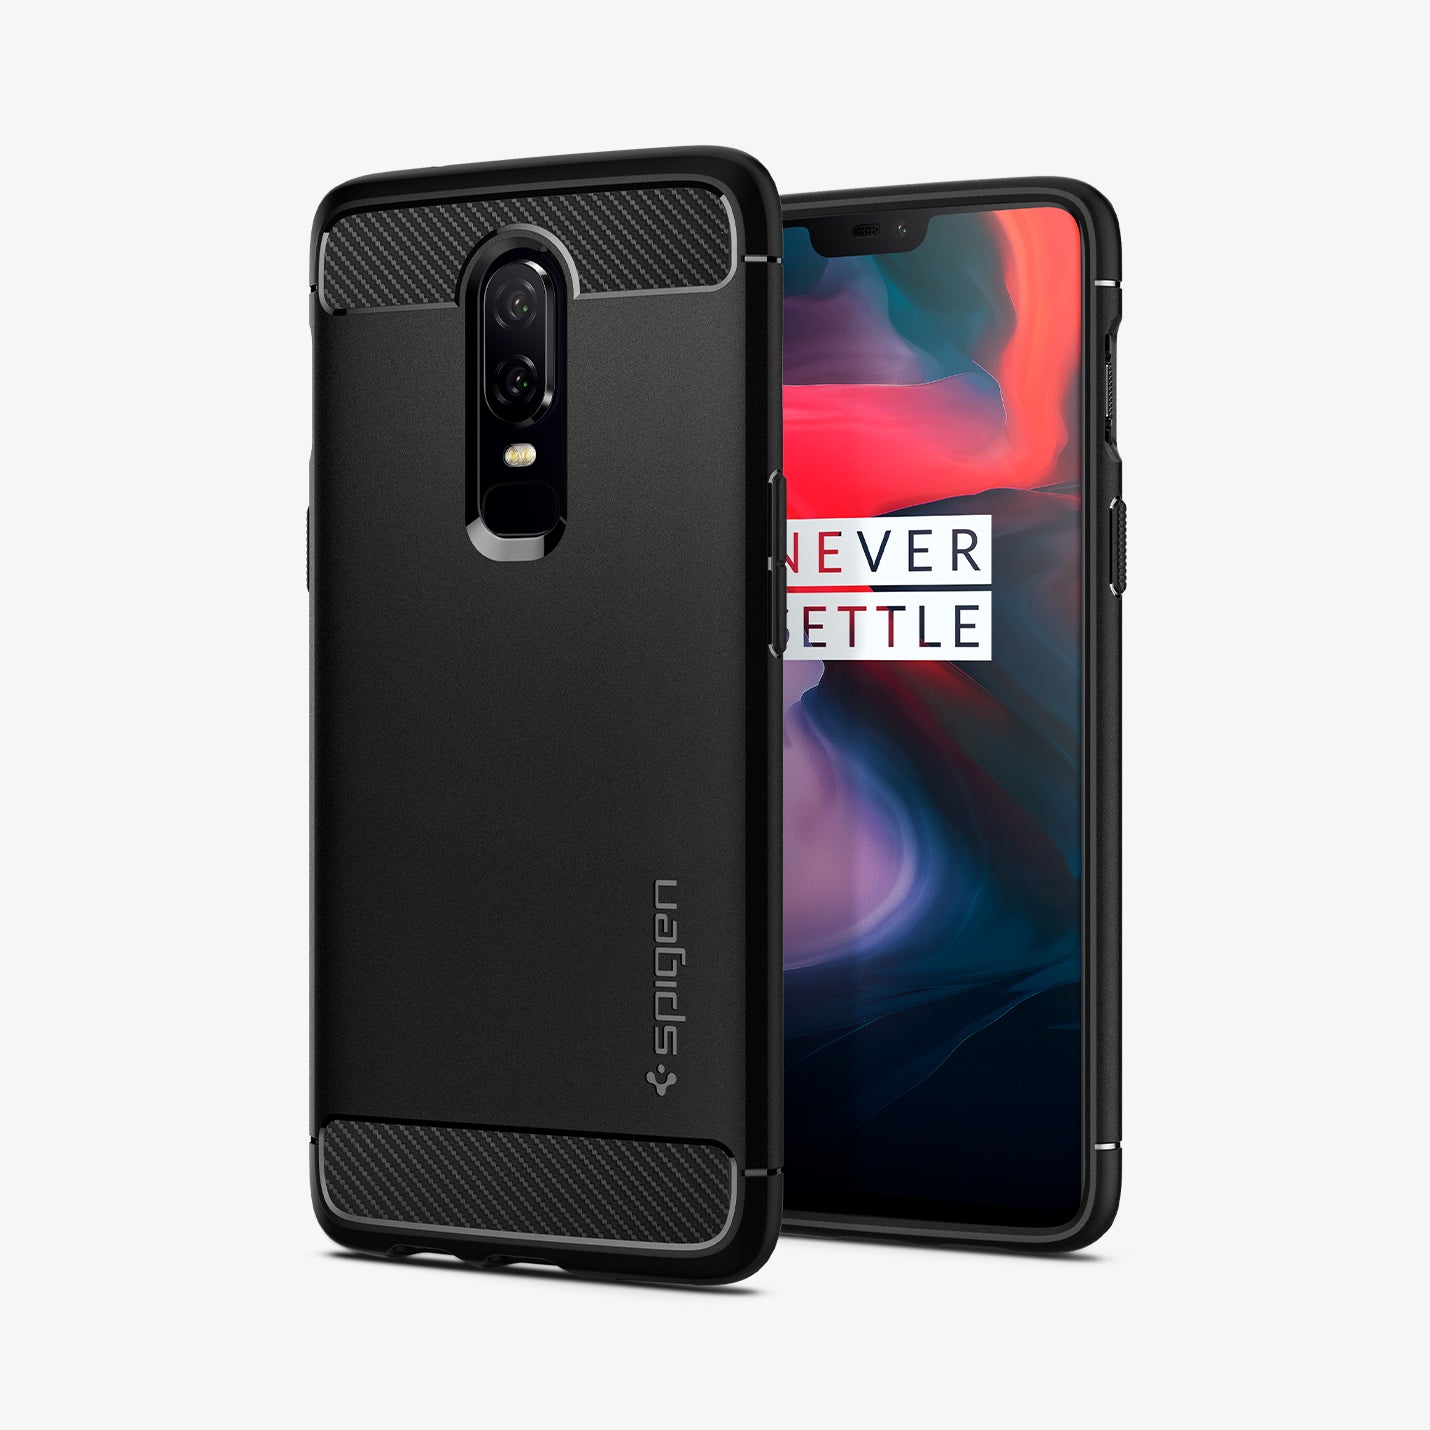 K06CS23358 - OnePlus 6 Rugged Armor Case in Black showing the back and front side by side